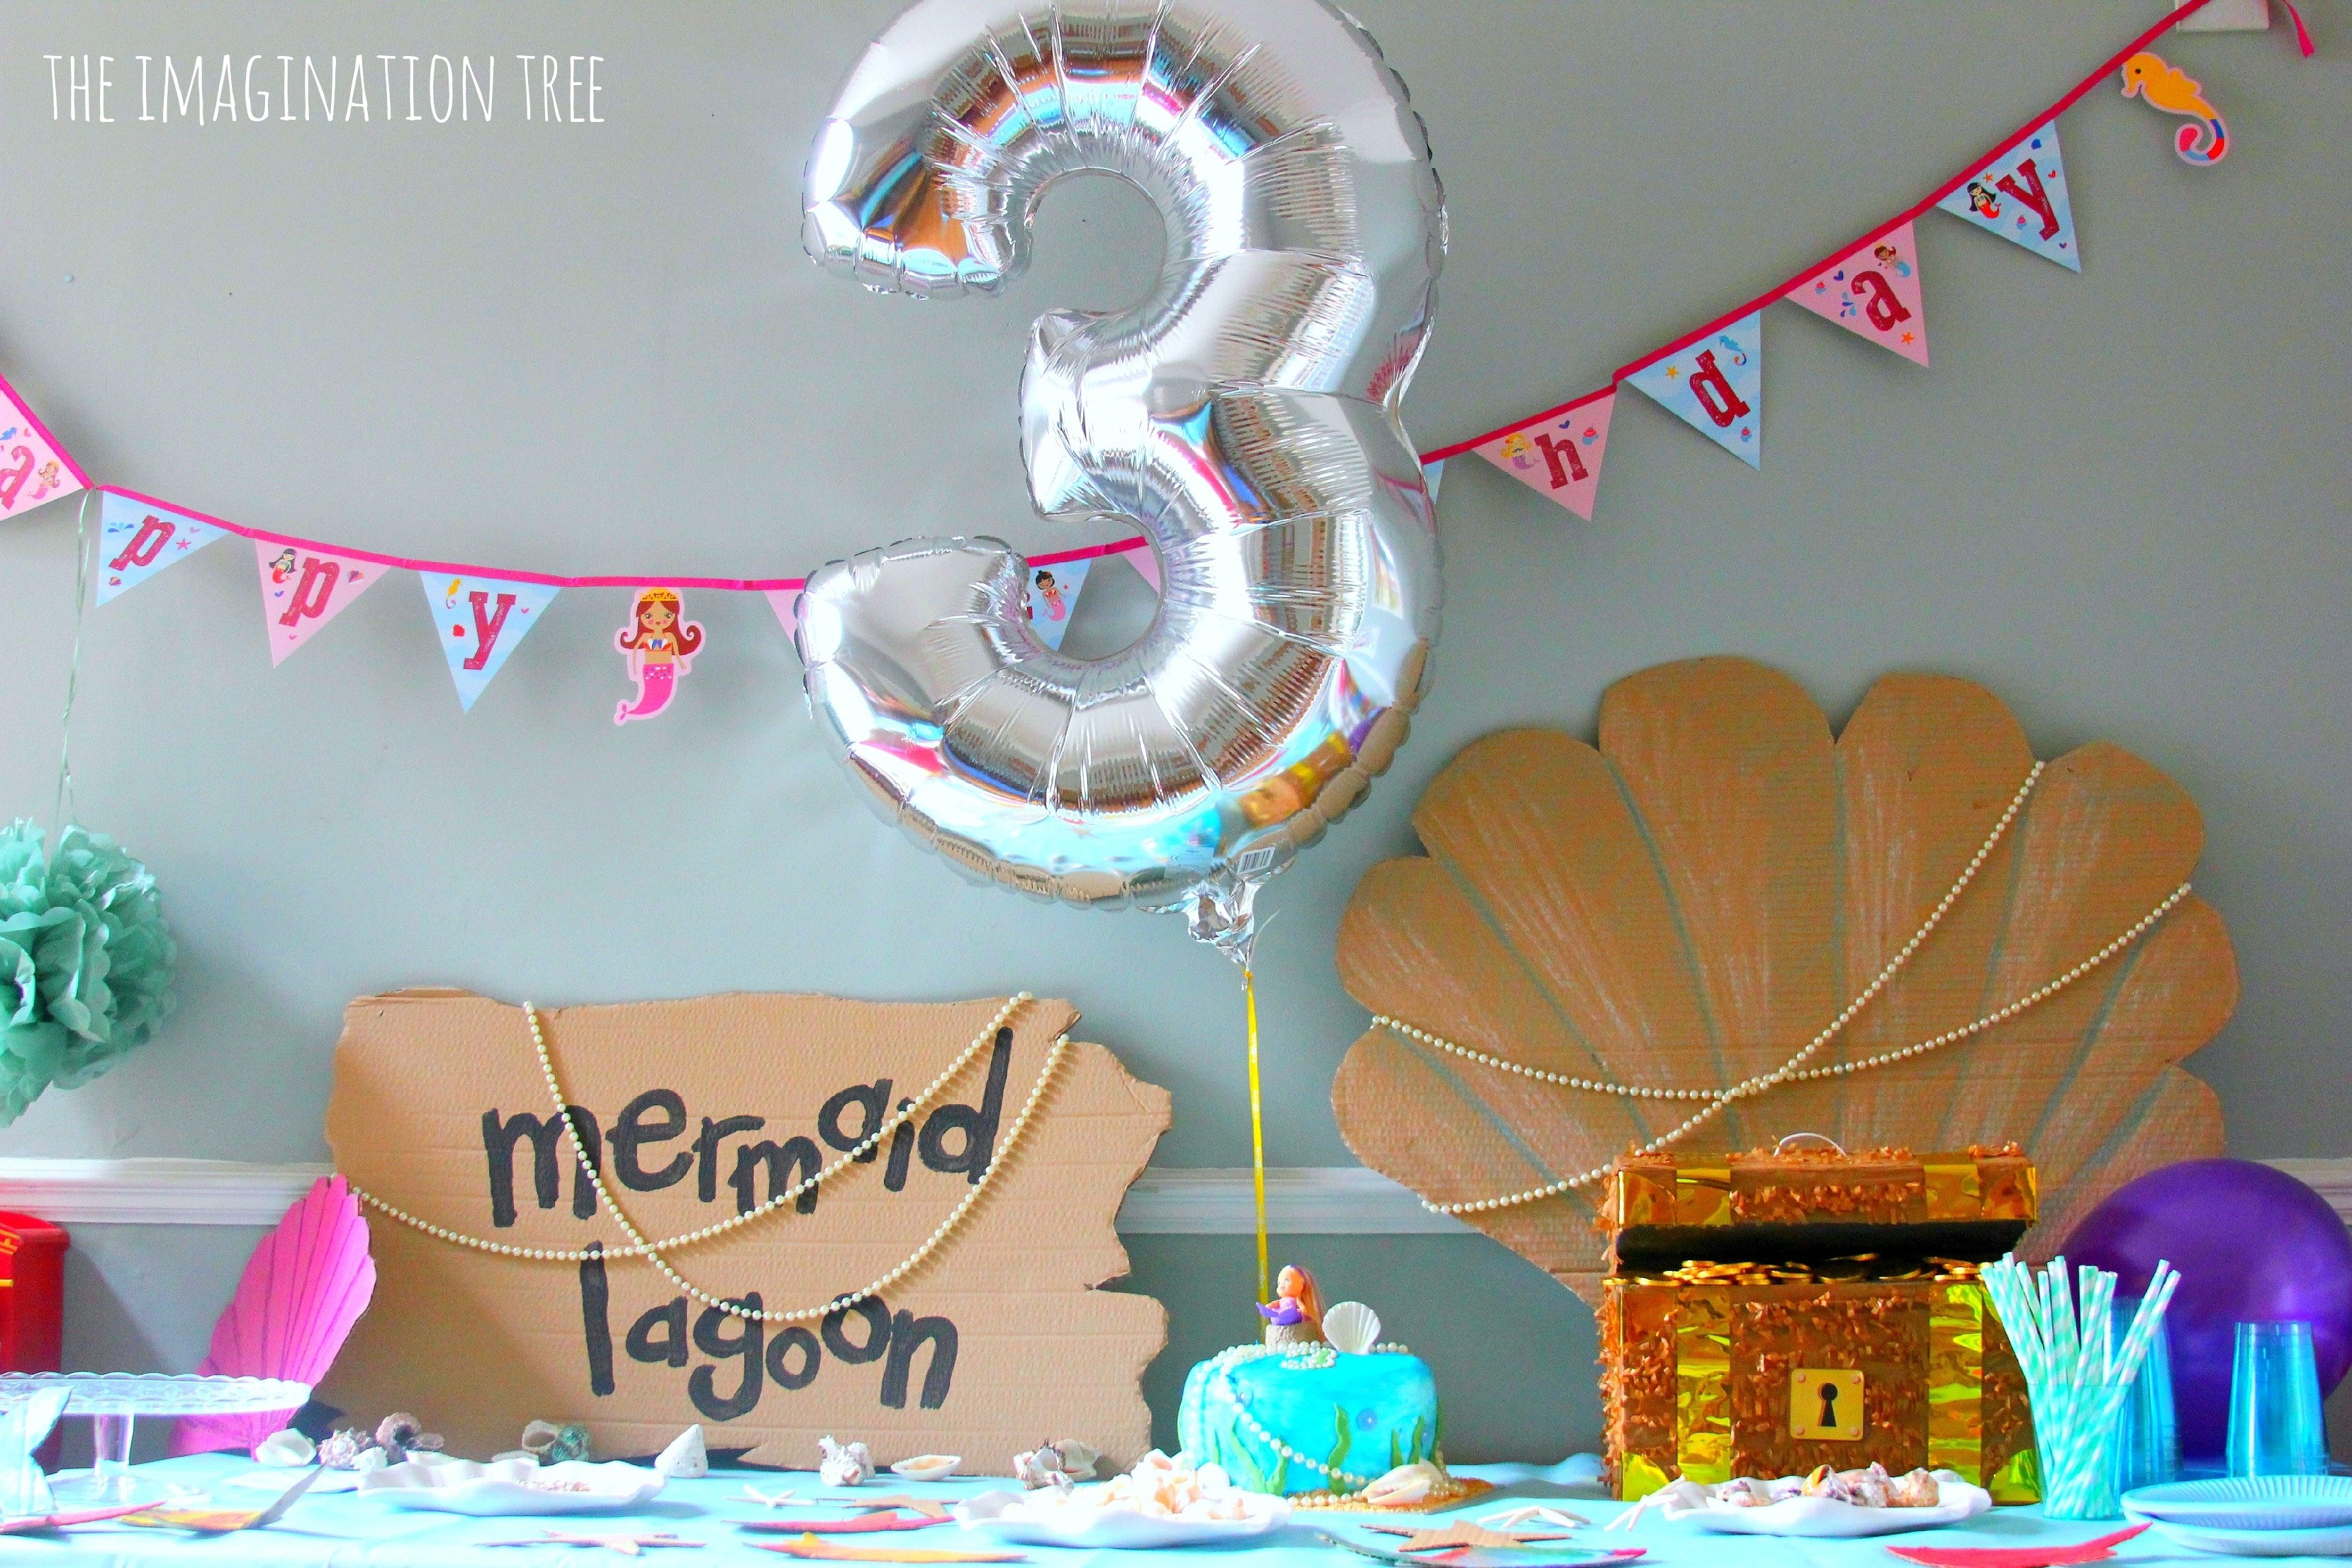 10 Unique Ideas For A Birthday Party mermaid birthday party ideas the imagination tree 2022